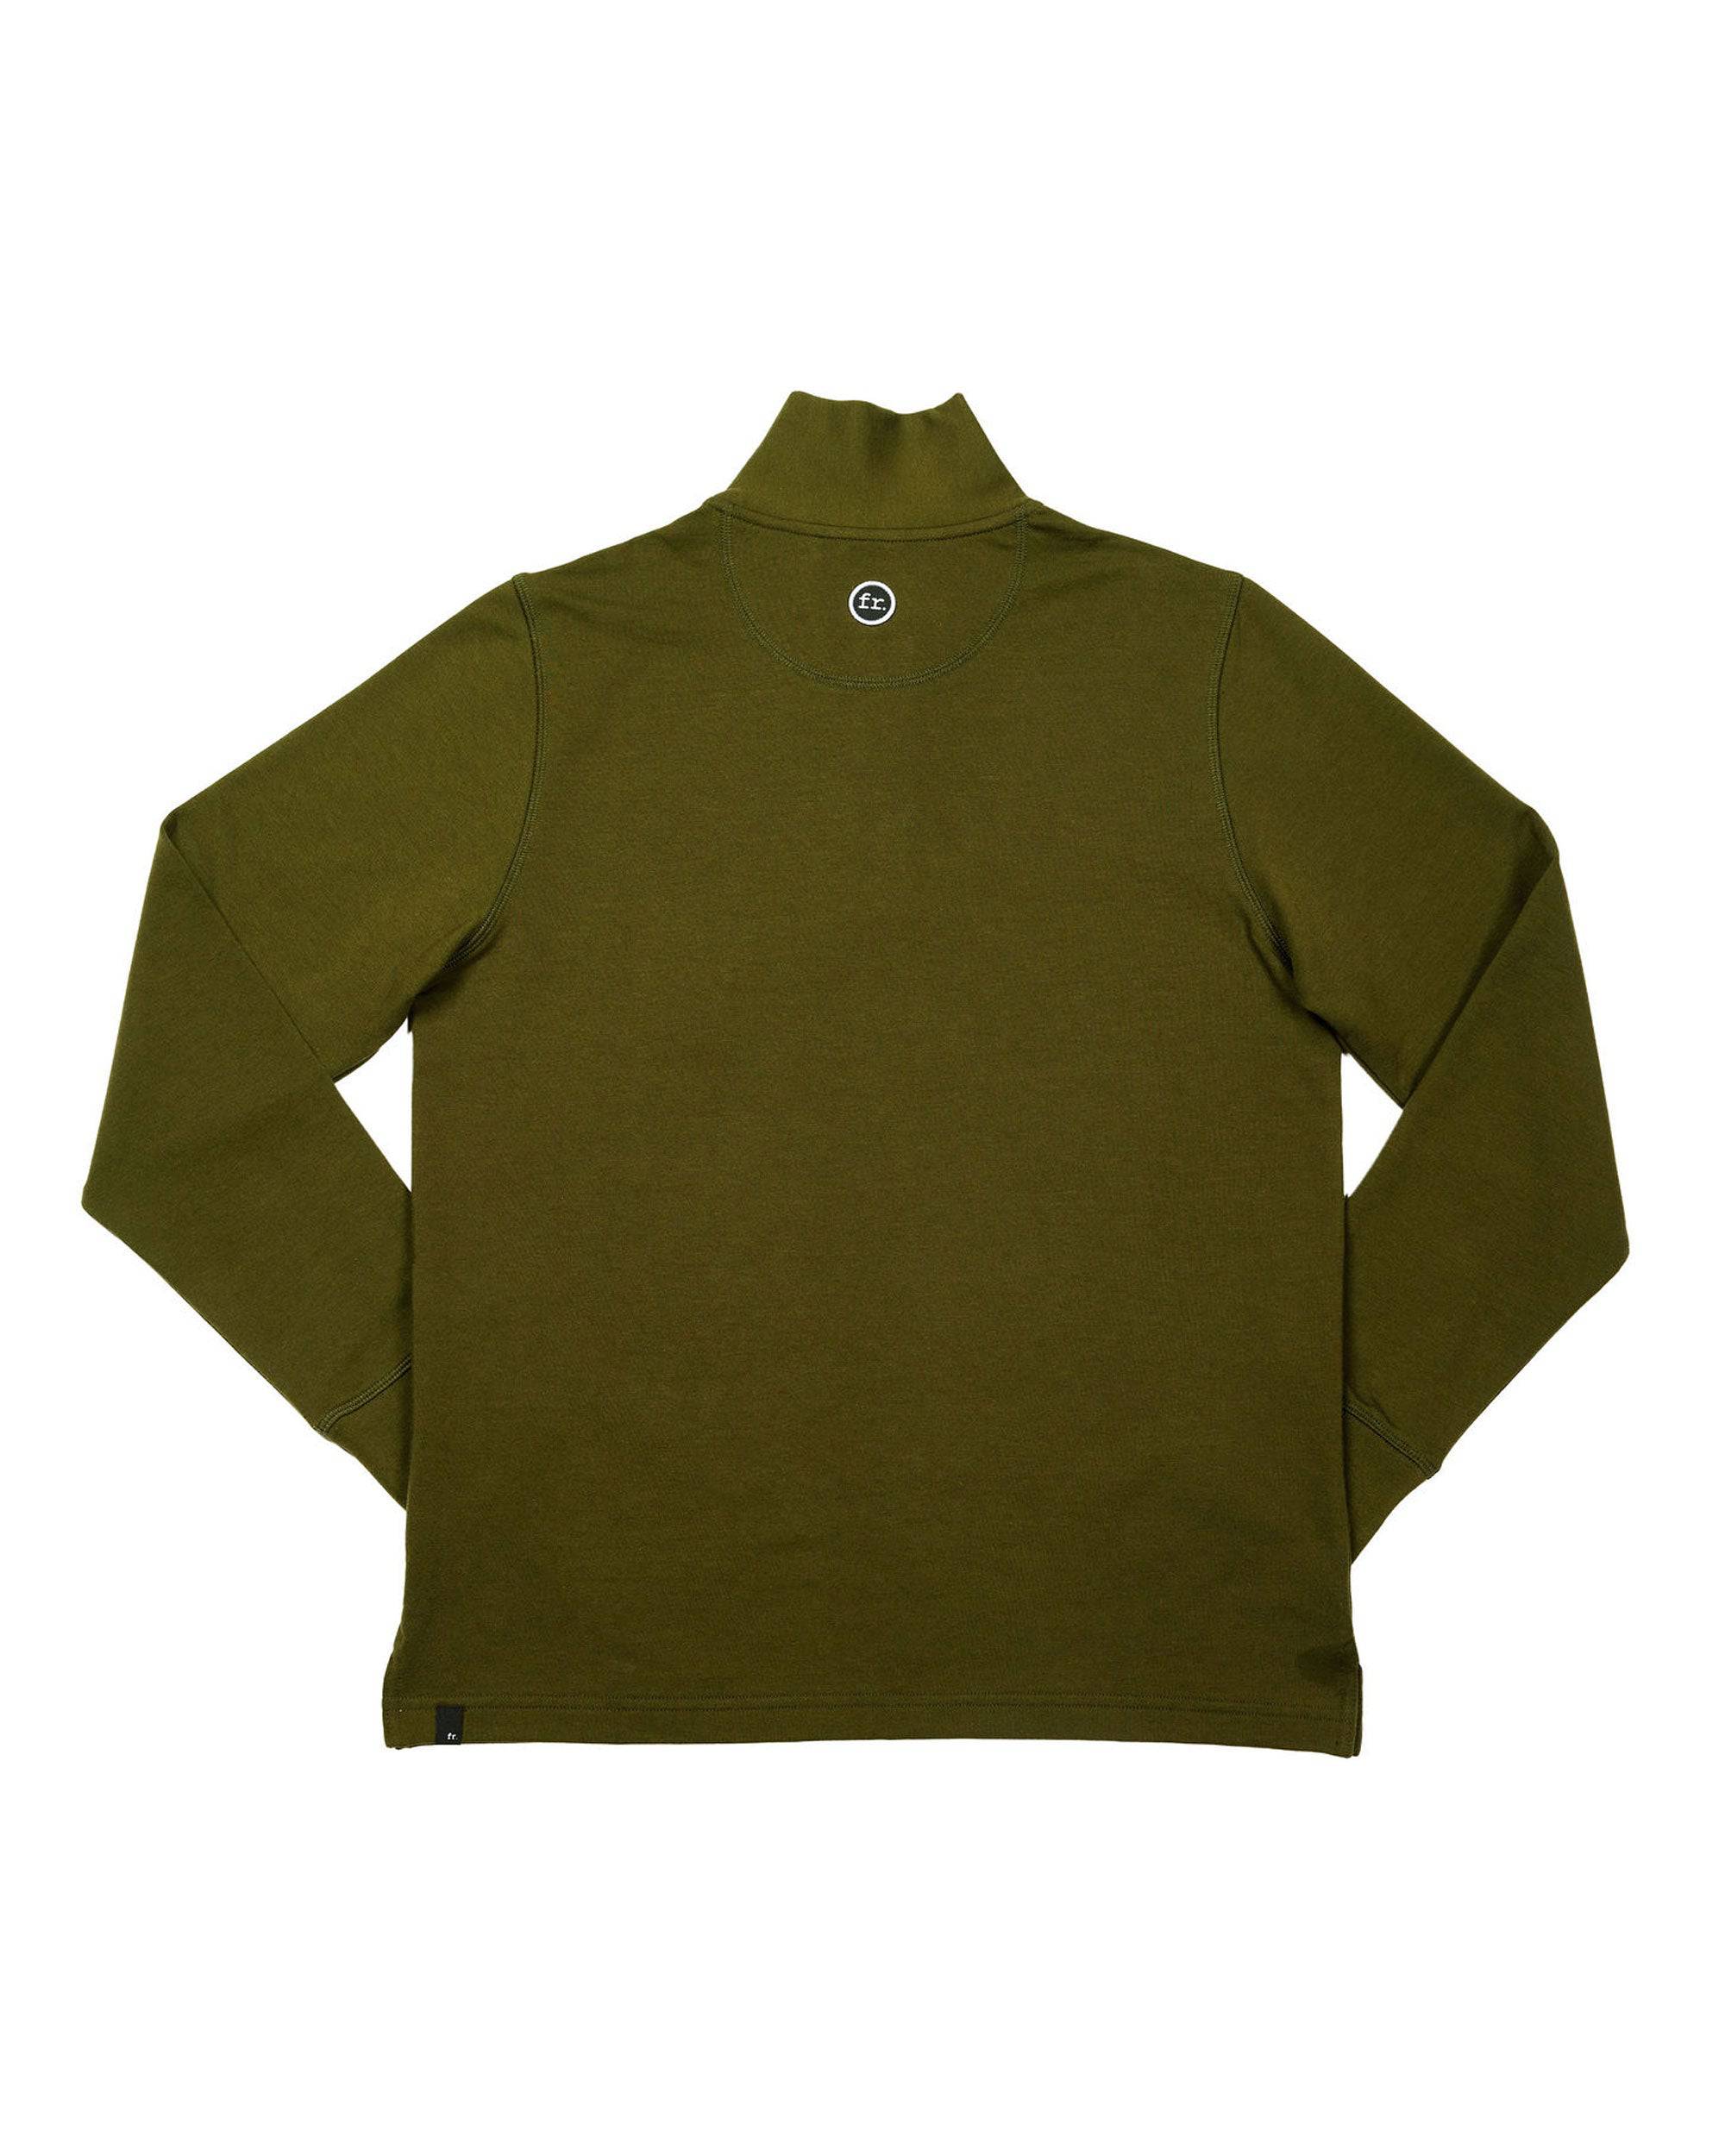 Solace Quarter Zip Olive - Foreign Rider Co.